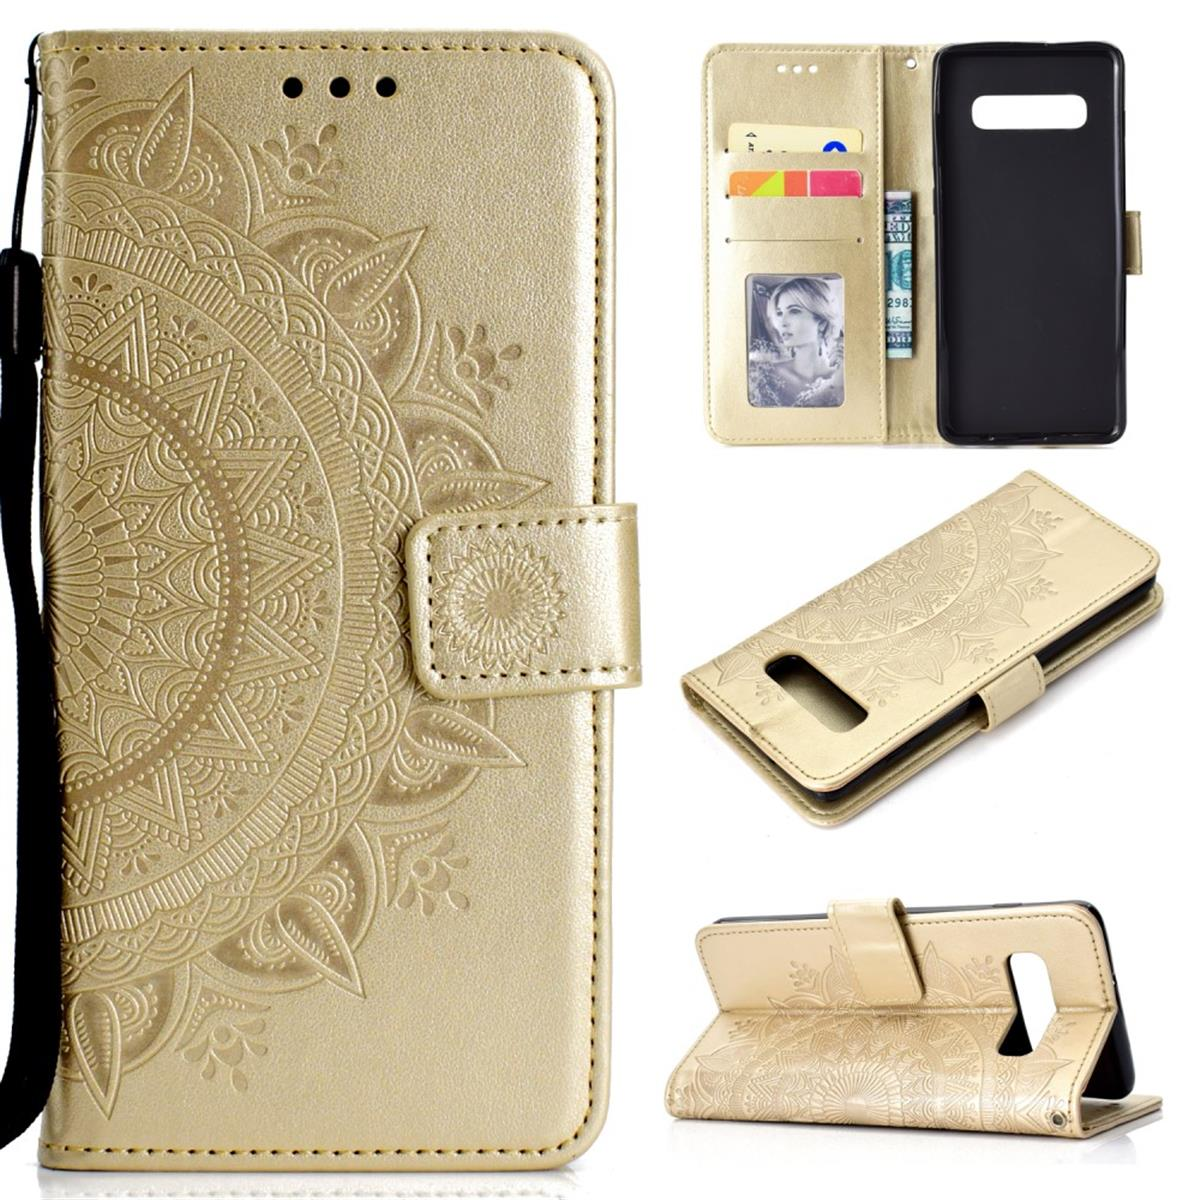 Samsung, Bookcover, Mandala mit Galaxy Klapphülle Gold COVERKINGZ Muster, S10,